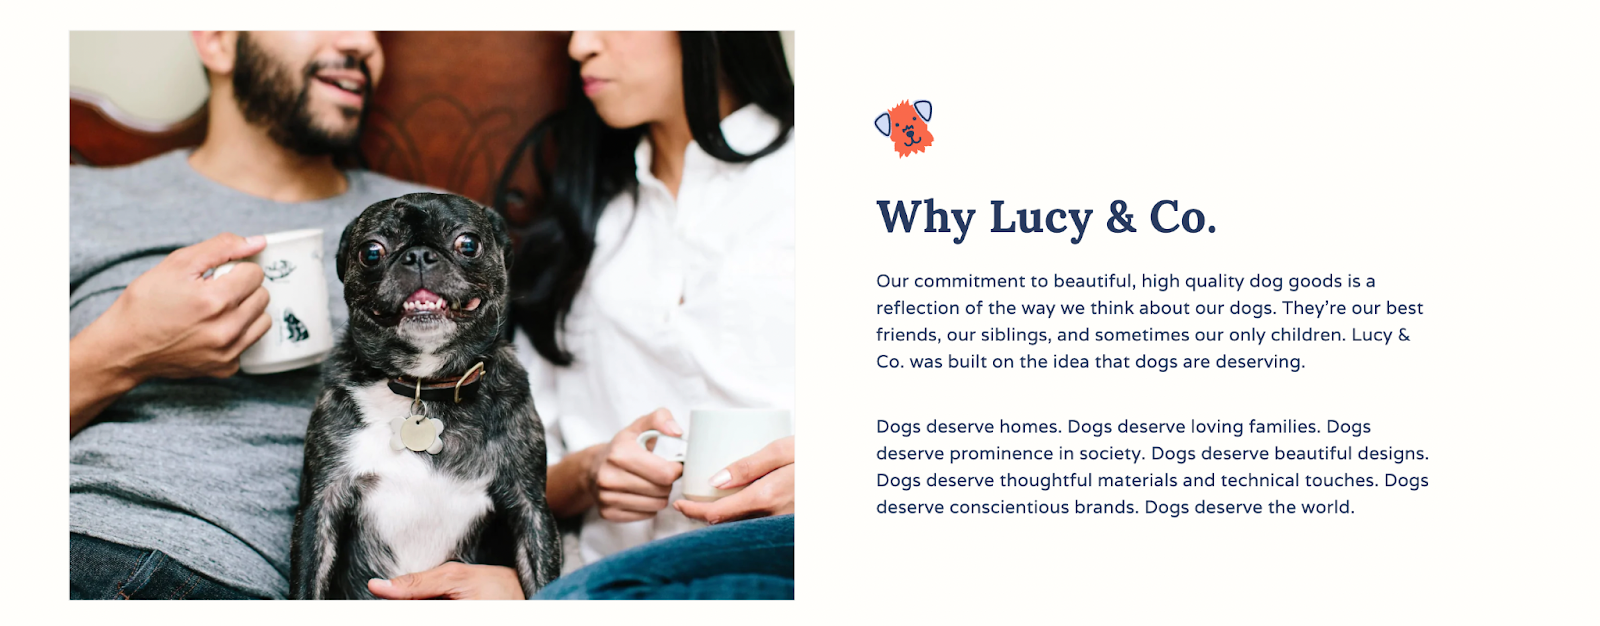 Lucy and Co.–A screenshot from Lucy and Co’s About Page. The left shows an image of two humans sitting on a couch with a black Pug/Boston Terrier mix on their lap. The right side shows text that says, “Why Lucy & Co. Our commitment to beautiful, high quality dog goods is a reflection of the way we think about our dogs. They’re our best friends, our siblings, and sometimes our only children. Lucy & Co. was built on the idea that dogs are deserving. Dogs deserve homes. Dogs deserve loving families. Dogs deserve prominence in society. Dogs deserve beautiful designs. Dogs deserve thoughtful materials and technical touches. Dogs deserve conscientious brands. Dogs deserve the world.” 